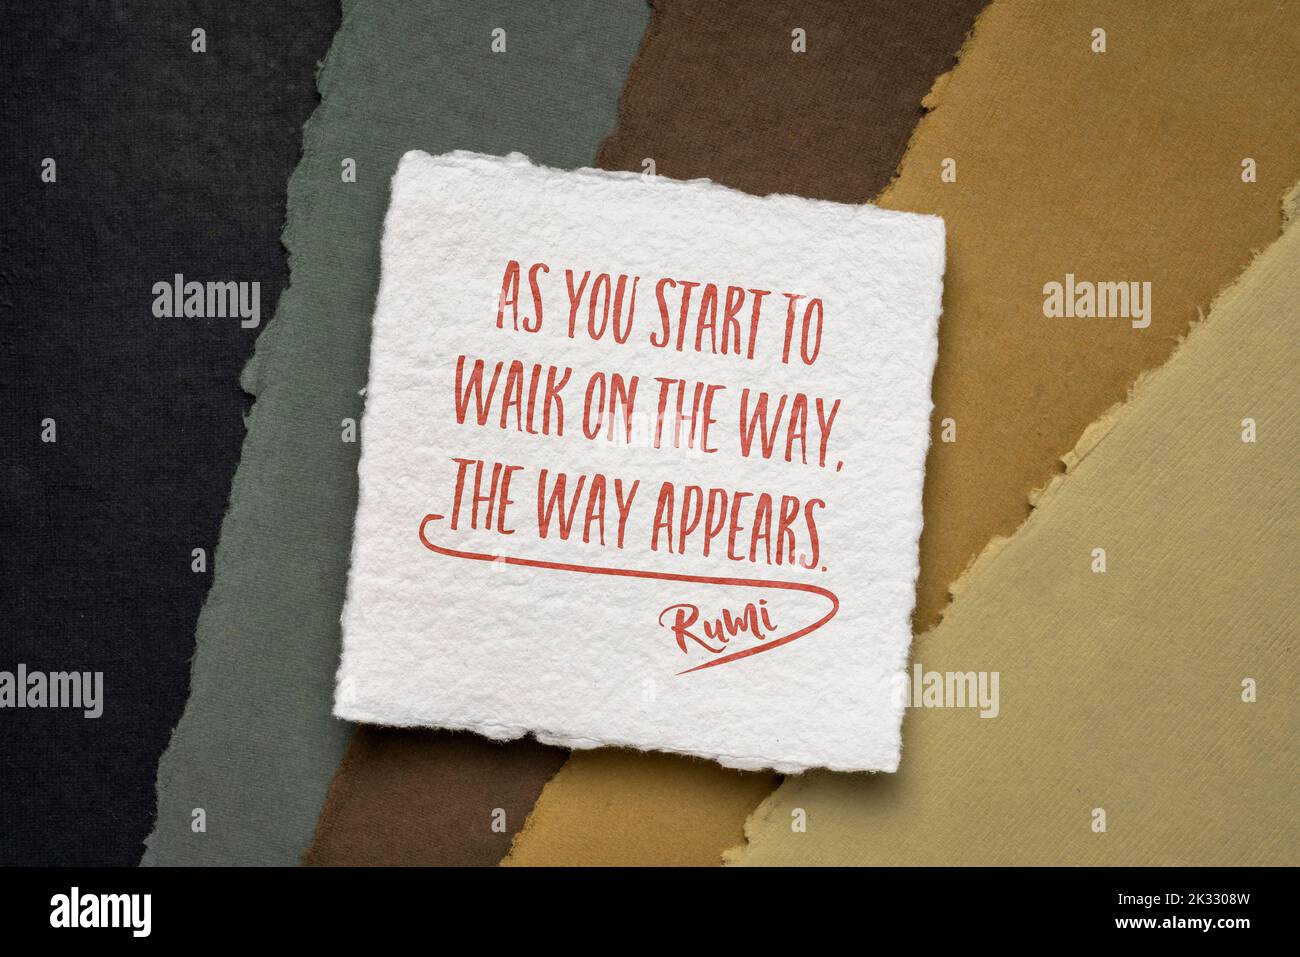 as you start walking on the way, the way appears - Rumi quote on a square sheet of Khadi paper against abstract in earth colors Stock Photo